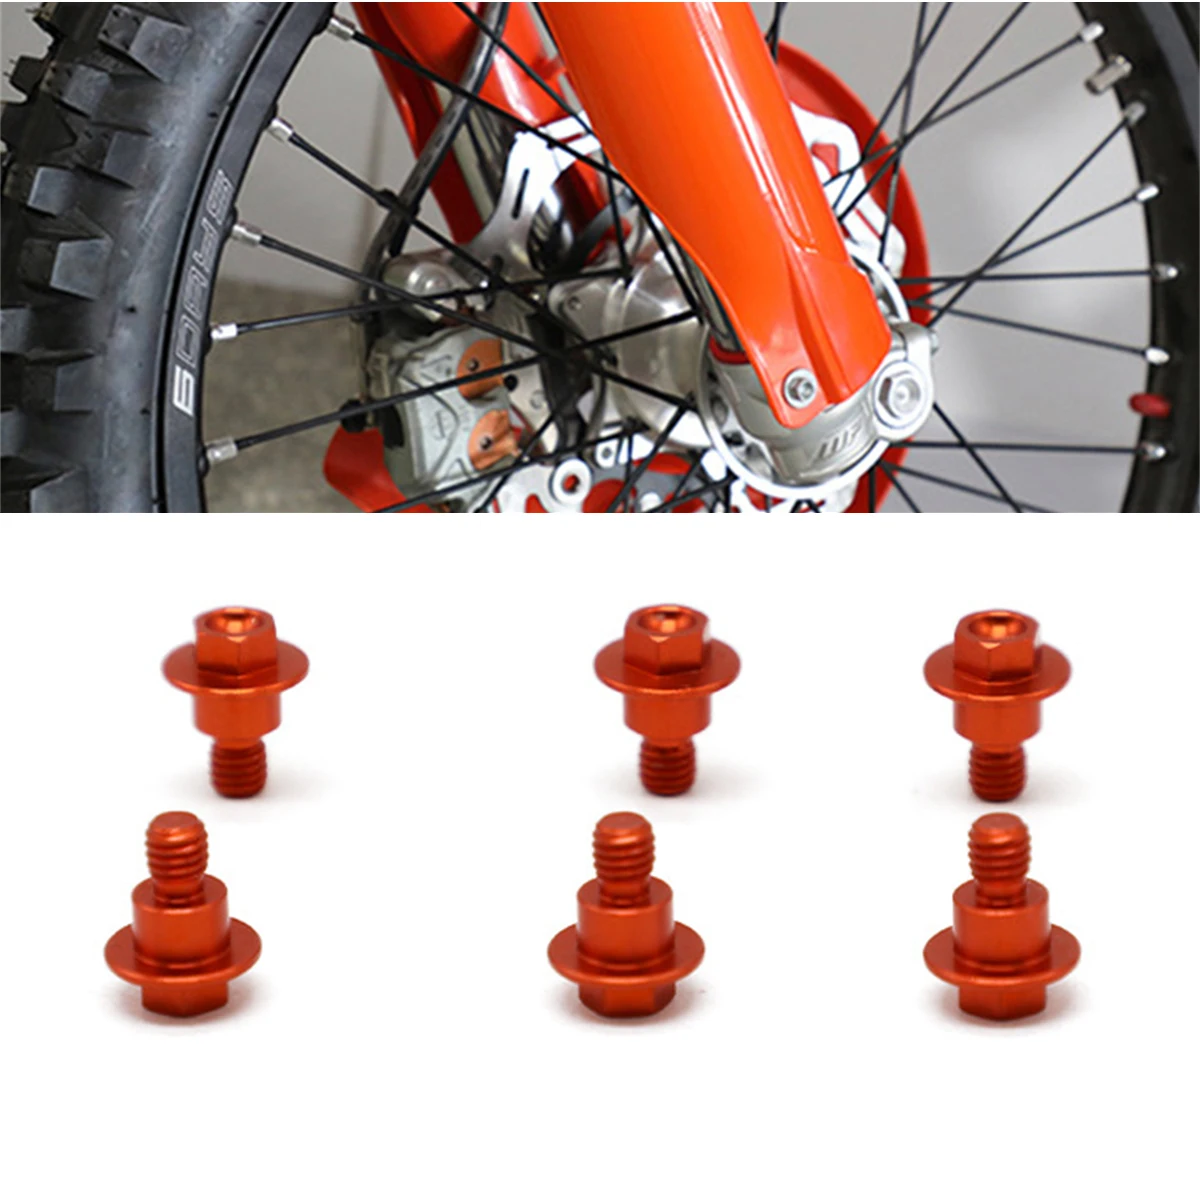 

Motorcycle Screws Fork Guard Bolt For KTM FREERIDE SX SXF XC XCF EXC TRI EXCF XCW XCFW 85 125 150 250 350 450 525 530 2020-2021